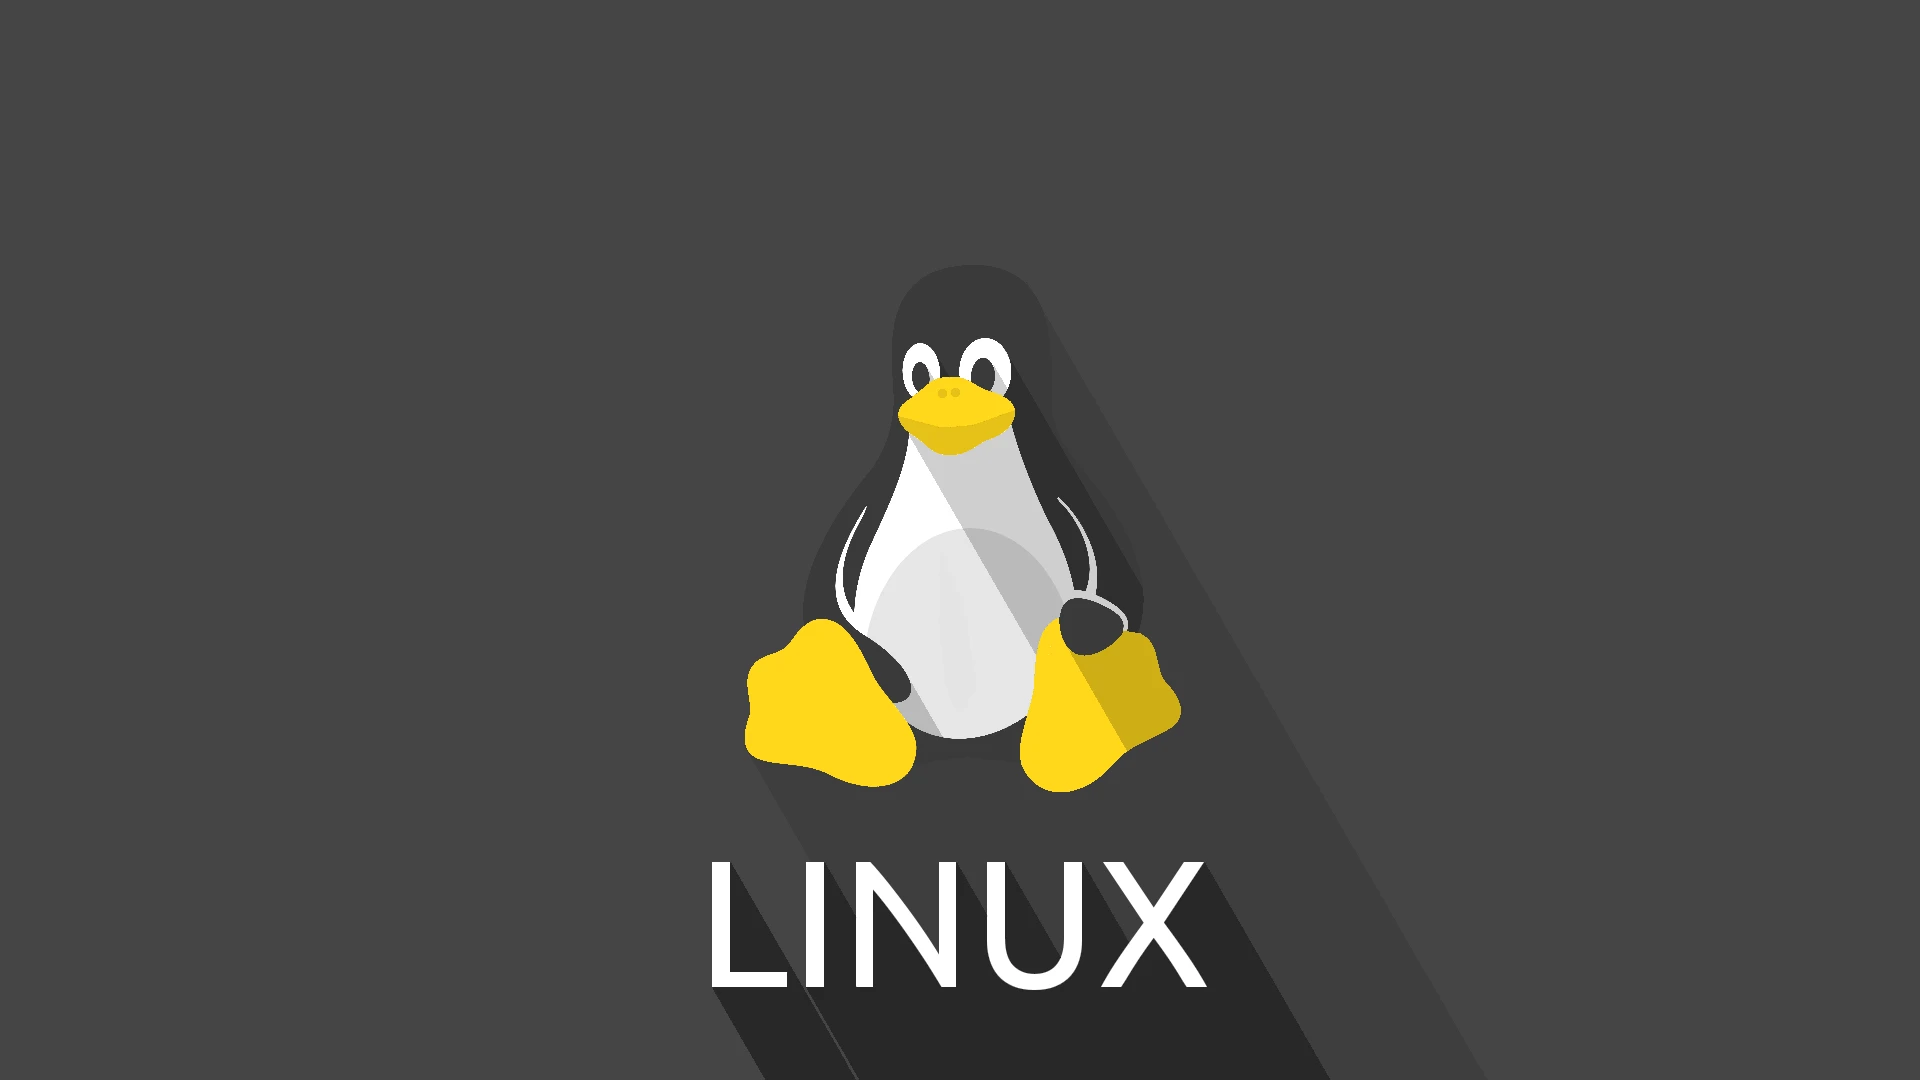 To Make Linux Better!